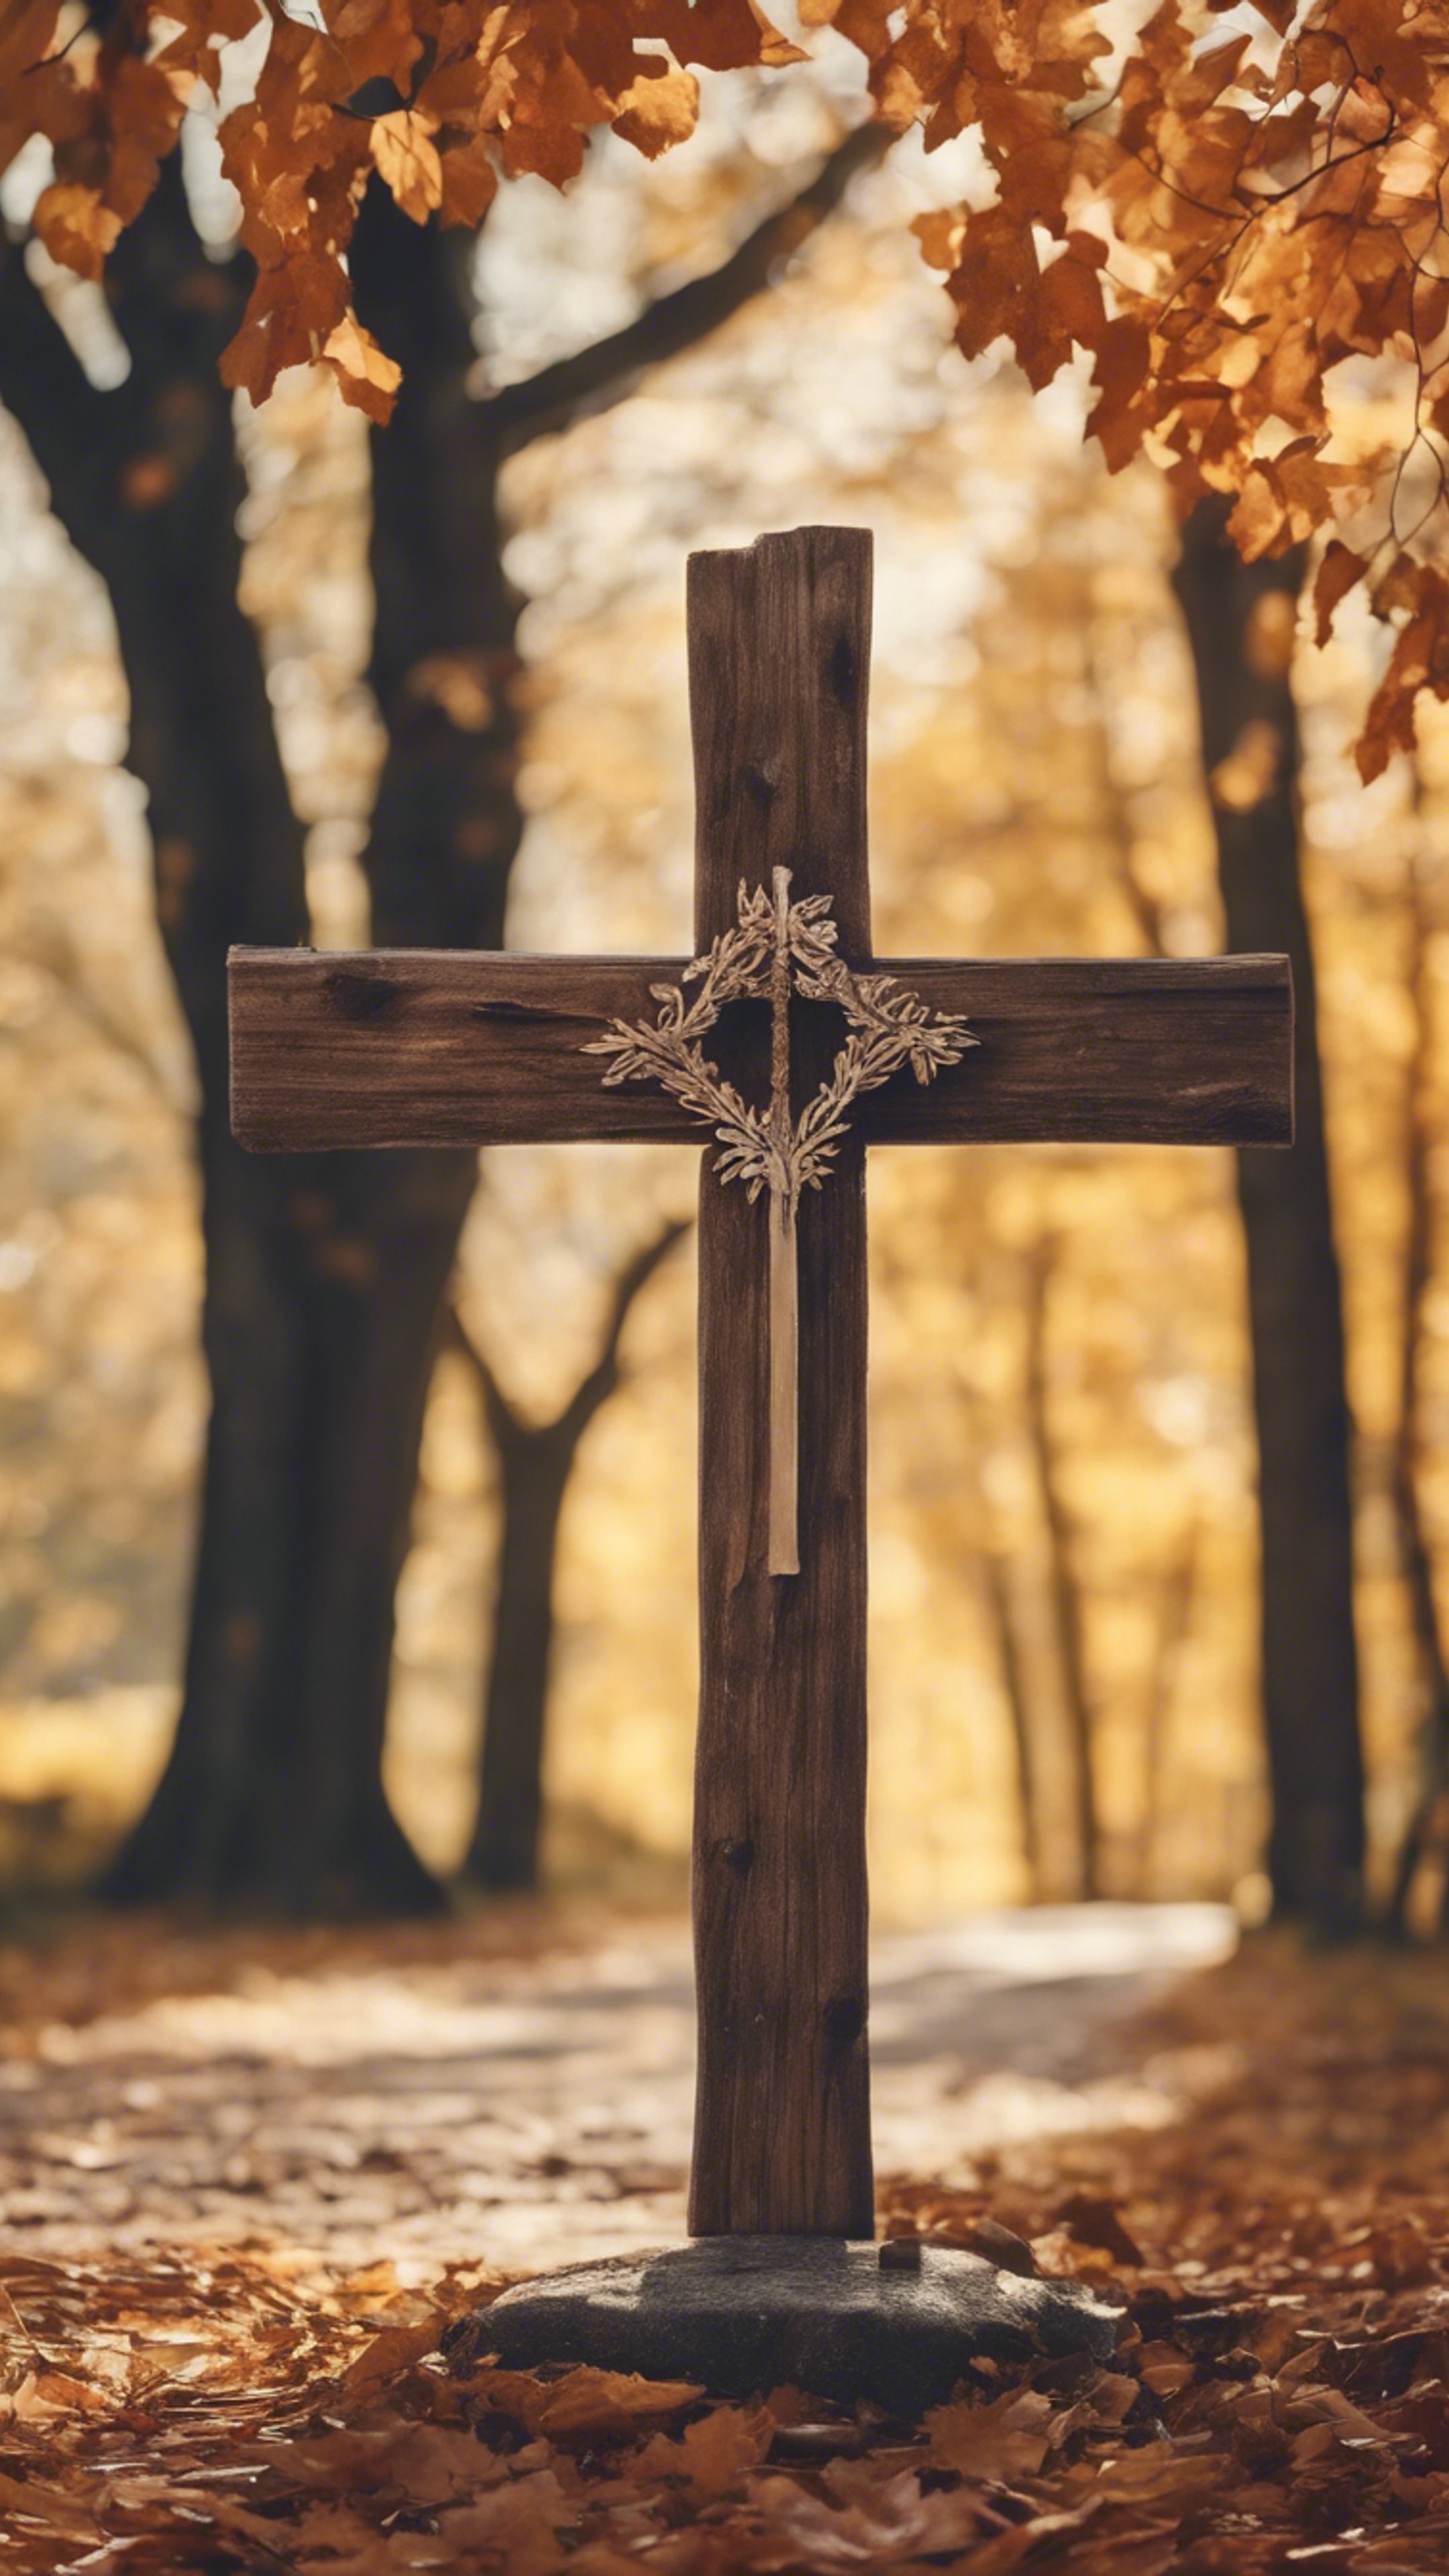 A rustic wooden cross standing by a country road, surrounded by autumn leaves. Шпалери[8ef87987617941c481d6]